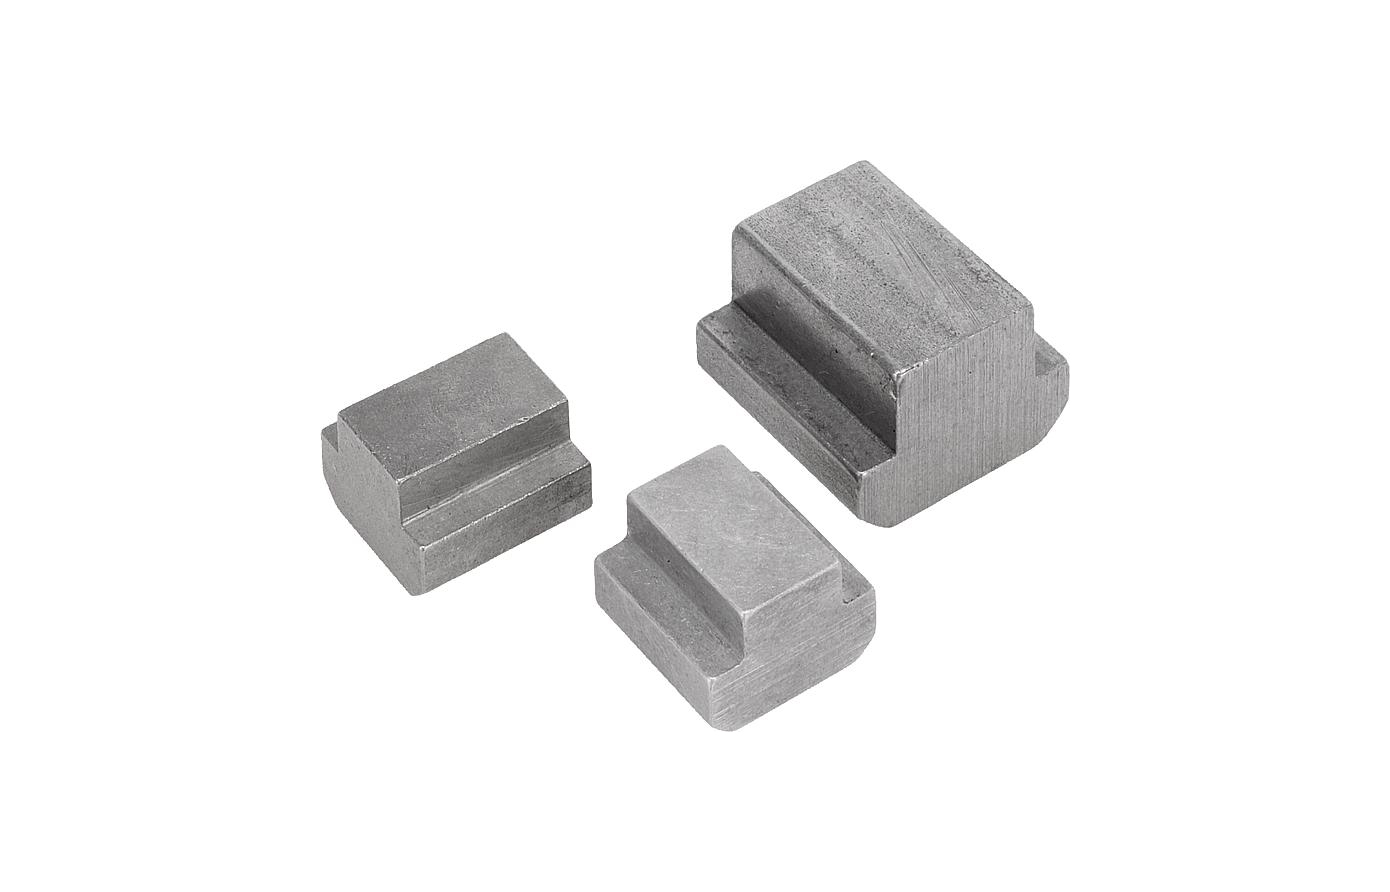 K0378 Nuts for T-slots blanks